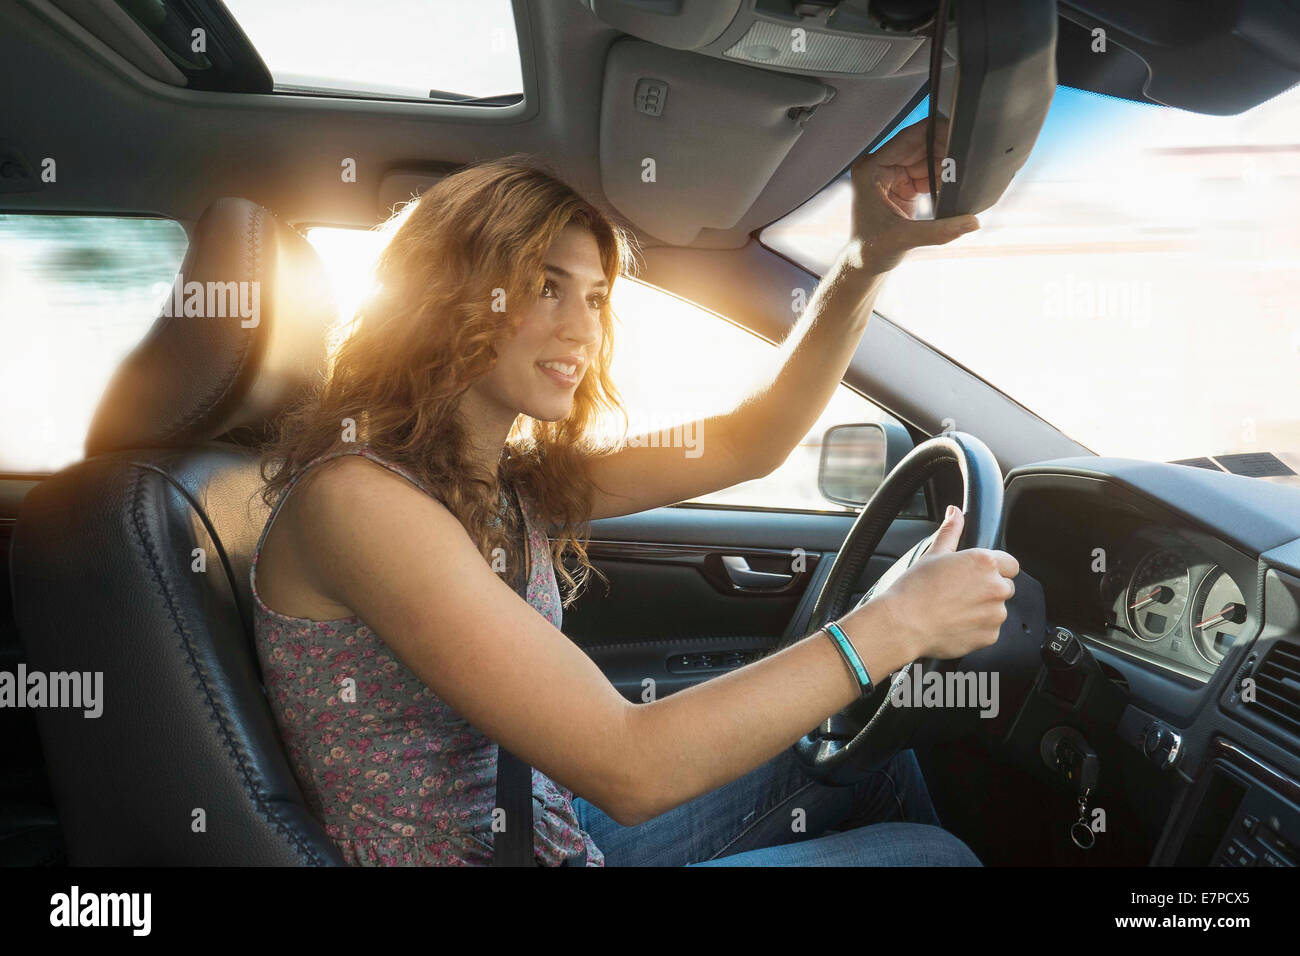 Young woman adjusting rear view mirror while driving Stock Photo